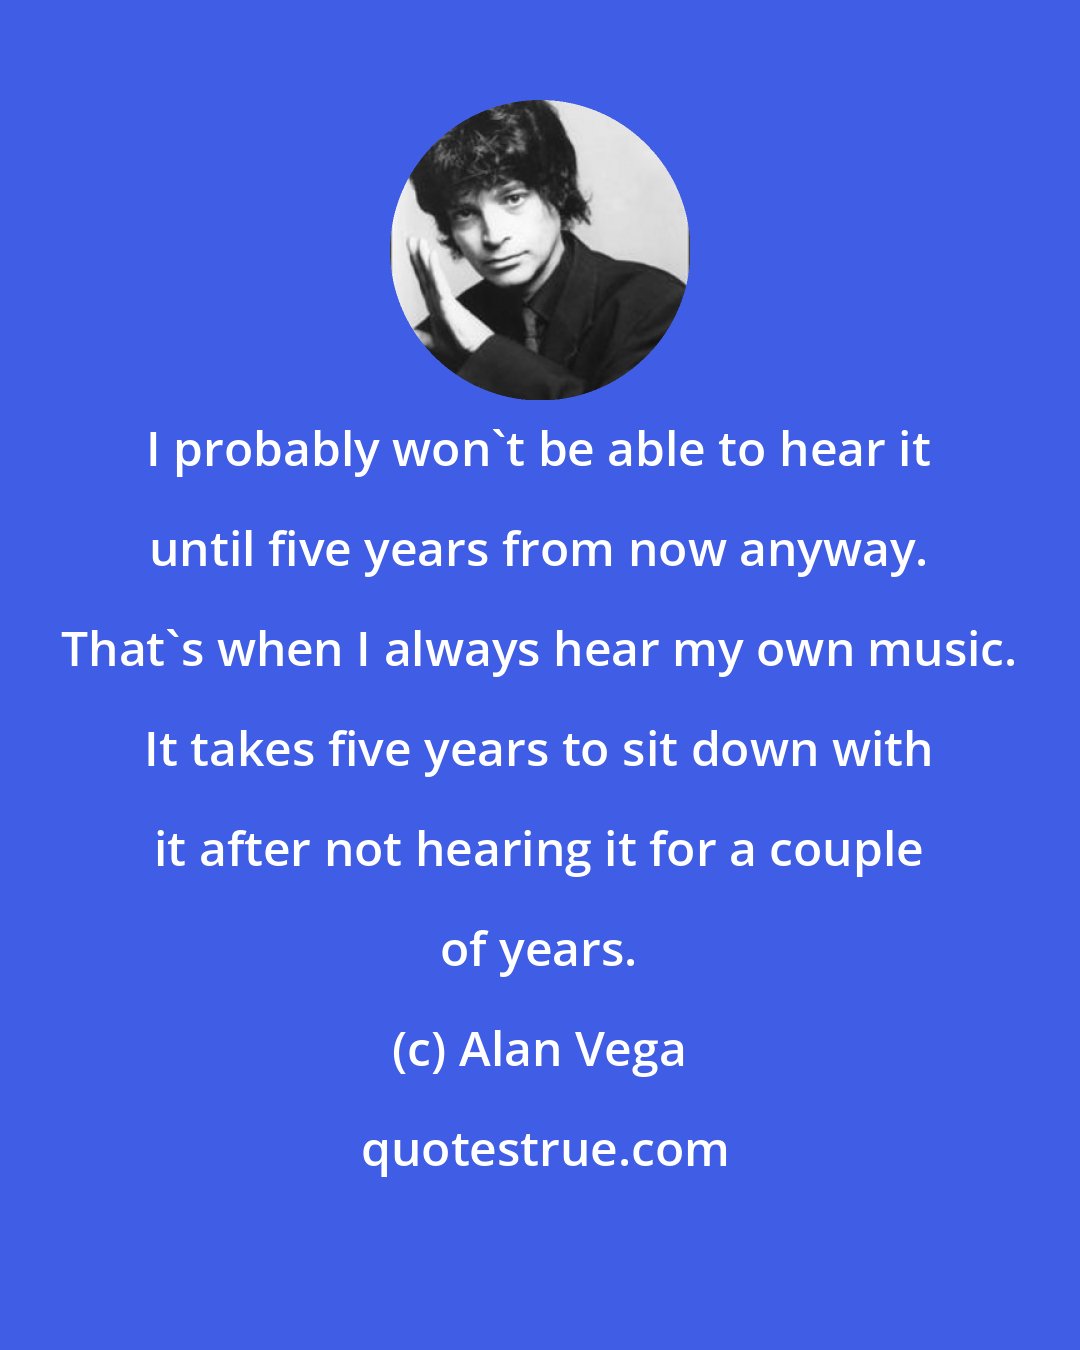 Alan Vega: I probably won't be able to hear it until five years from now anyway. That's when I always hear my own music. It takes five years to sit down with it after not hearing it for a couple of years.